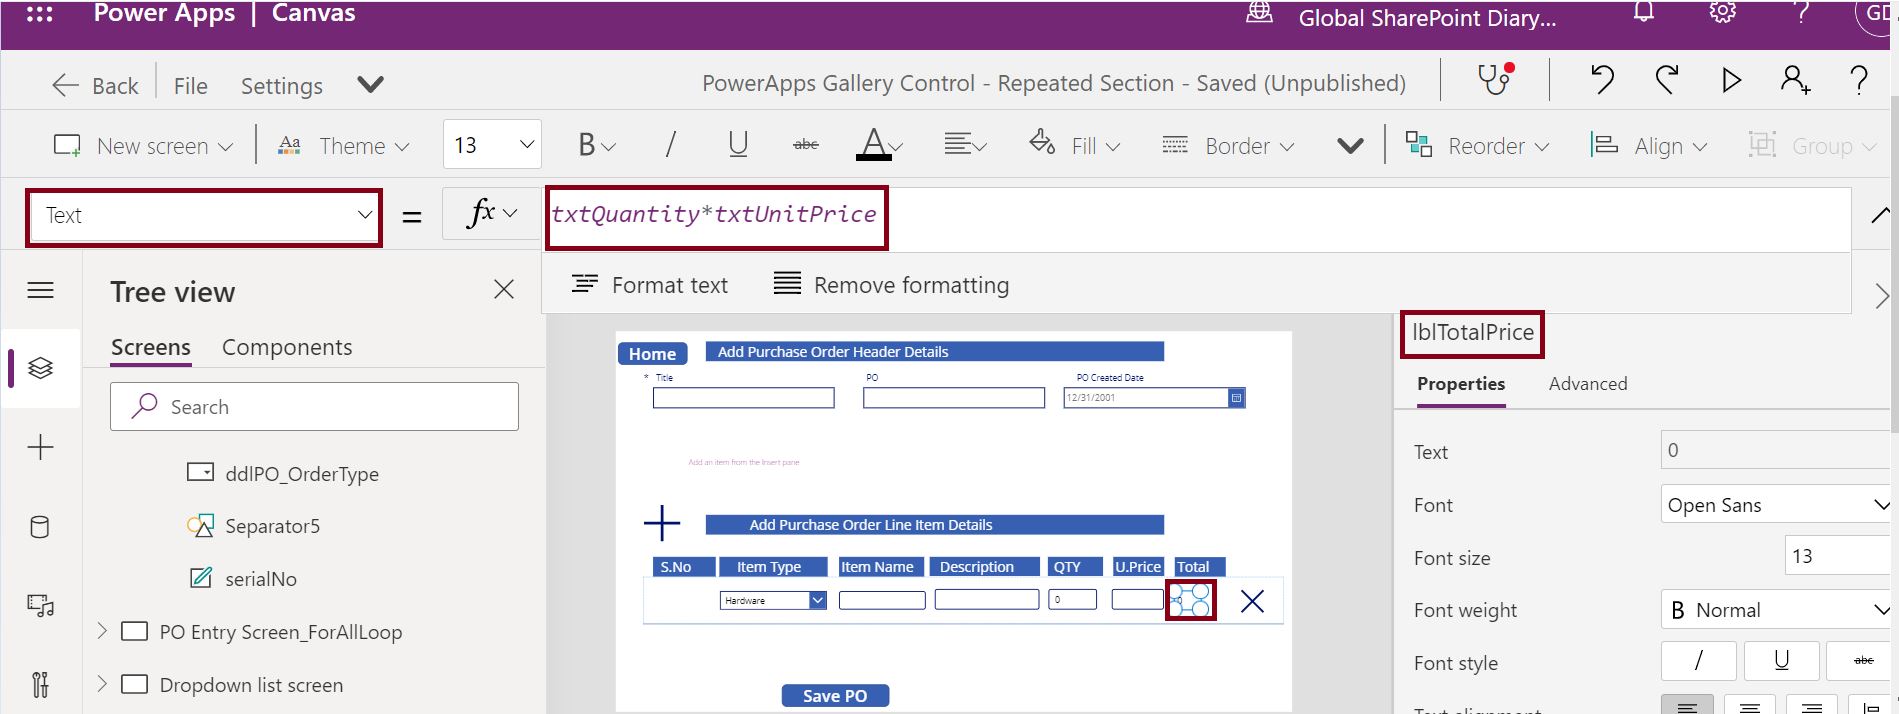 Automatic price calculation in PowerApps Gallery control